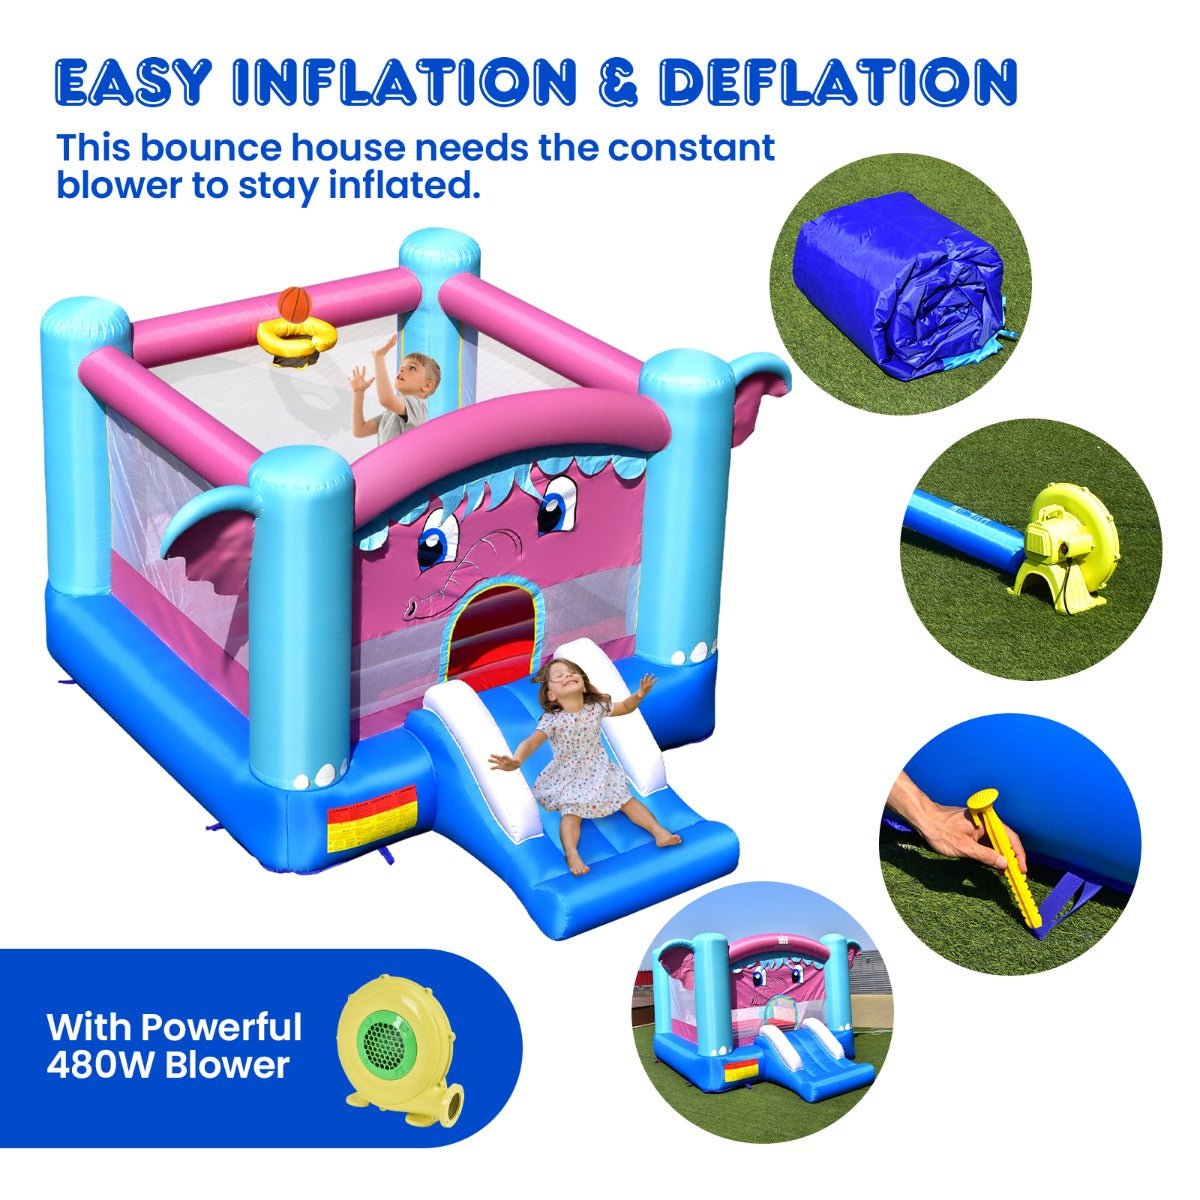 Unleash Playful Moments with the Inflatable Elephant Castle - Buy Now!